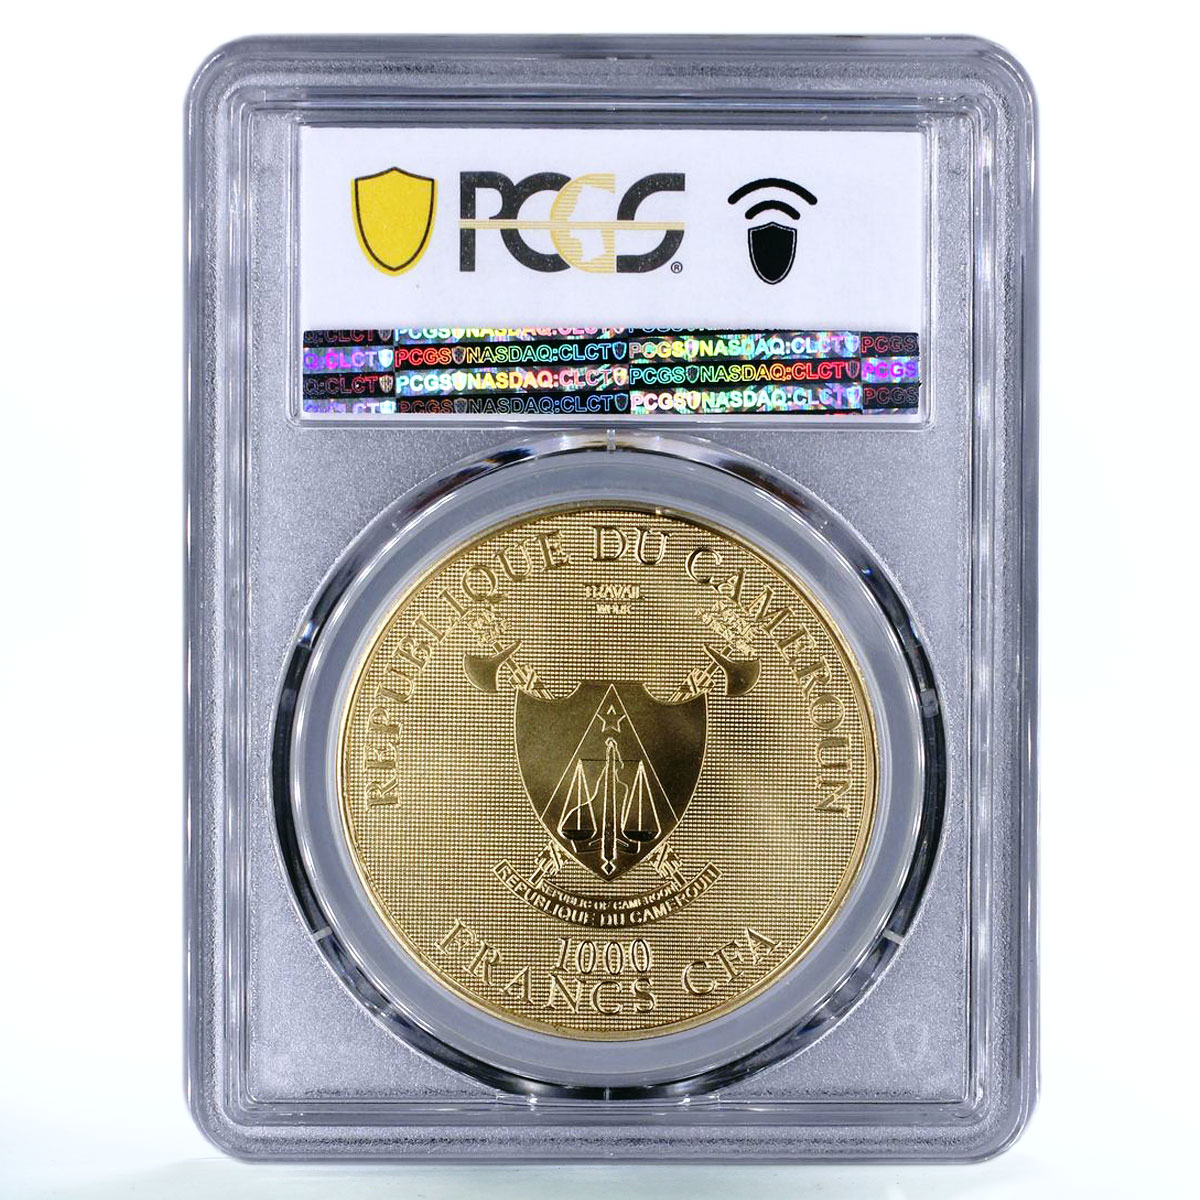 Cameroon 1000 francs Black Swan Bird Fauna MS70 PCGS gilded silver coin 2019